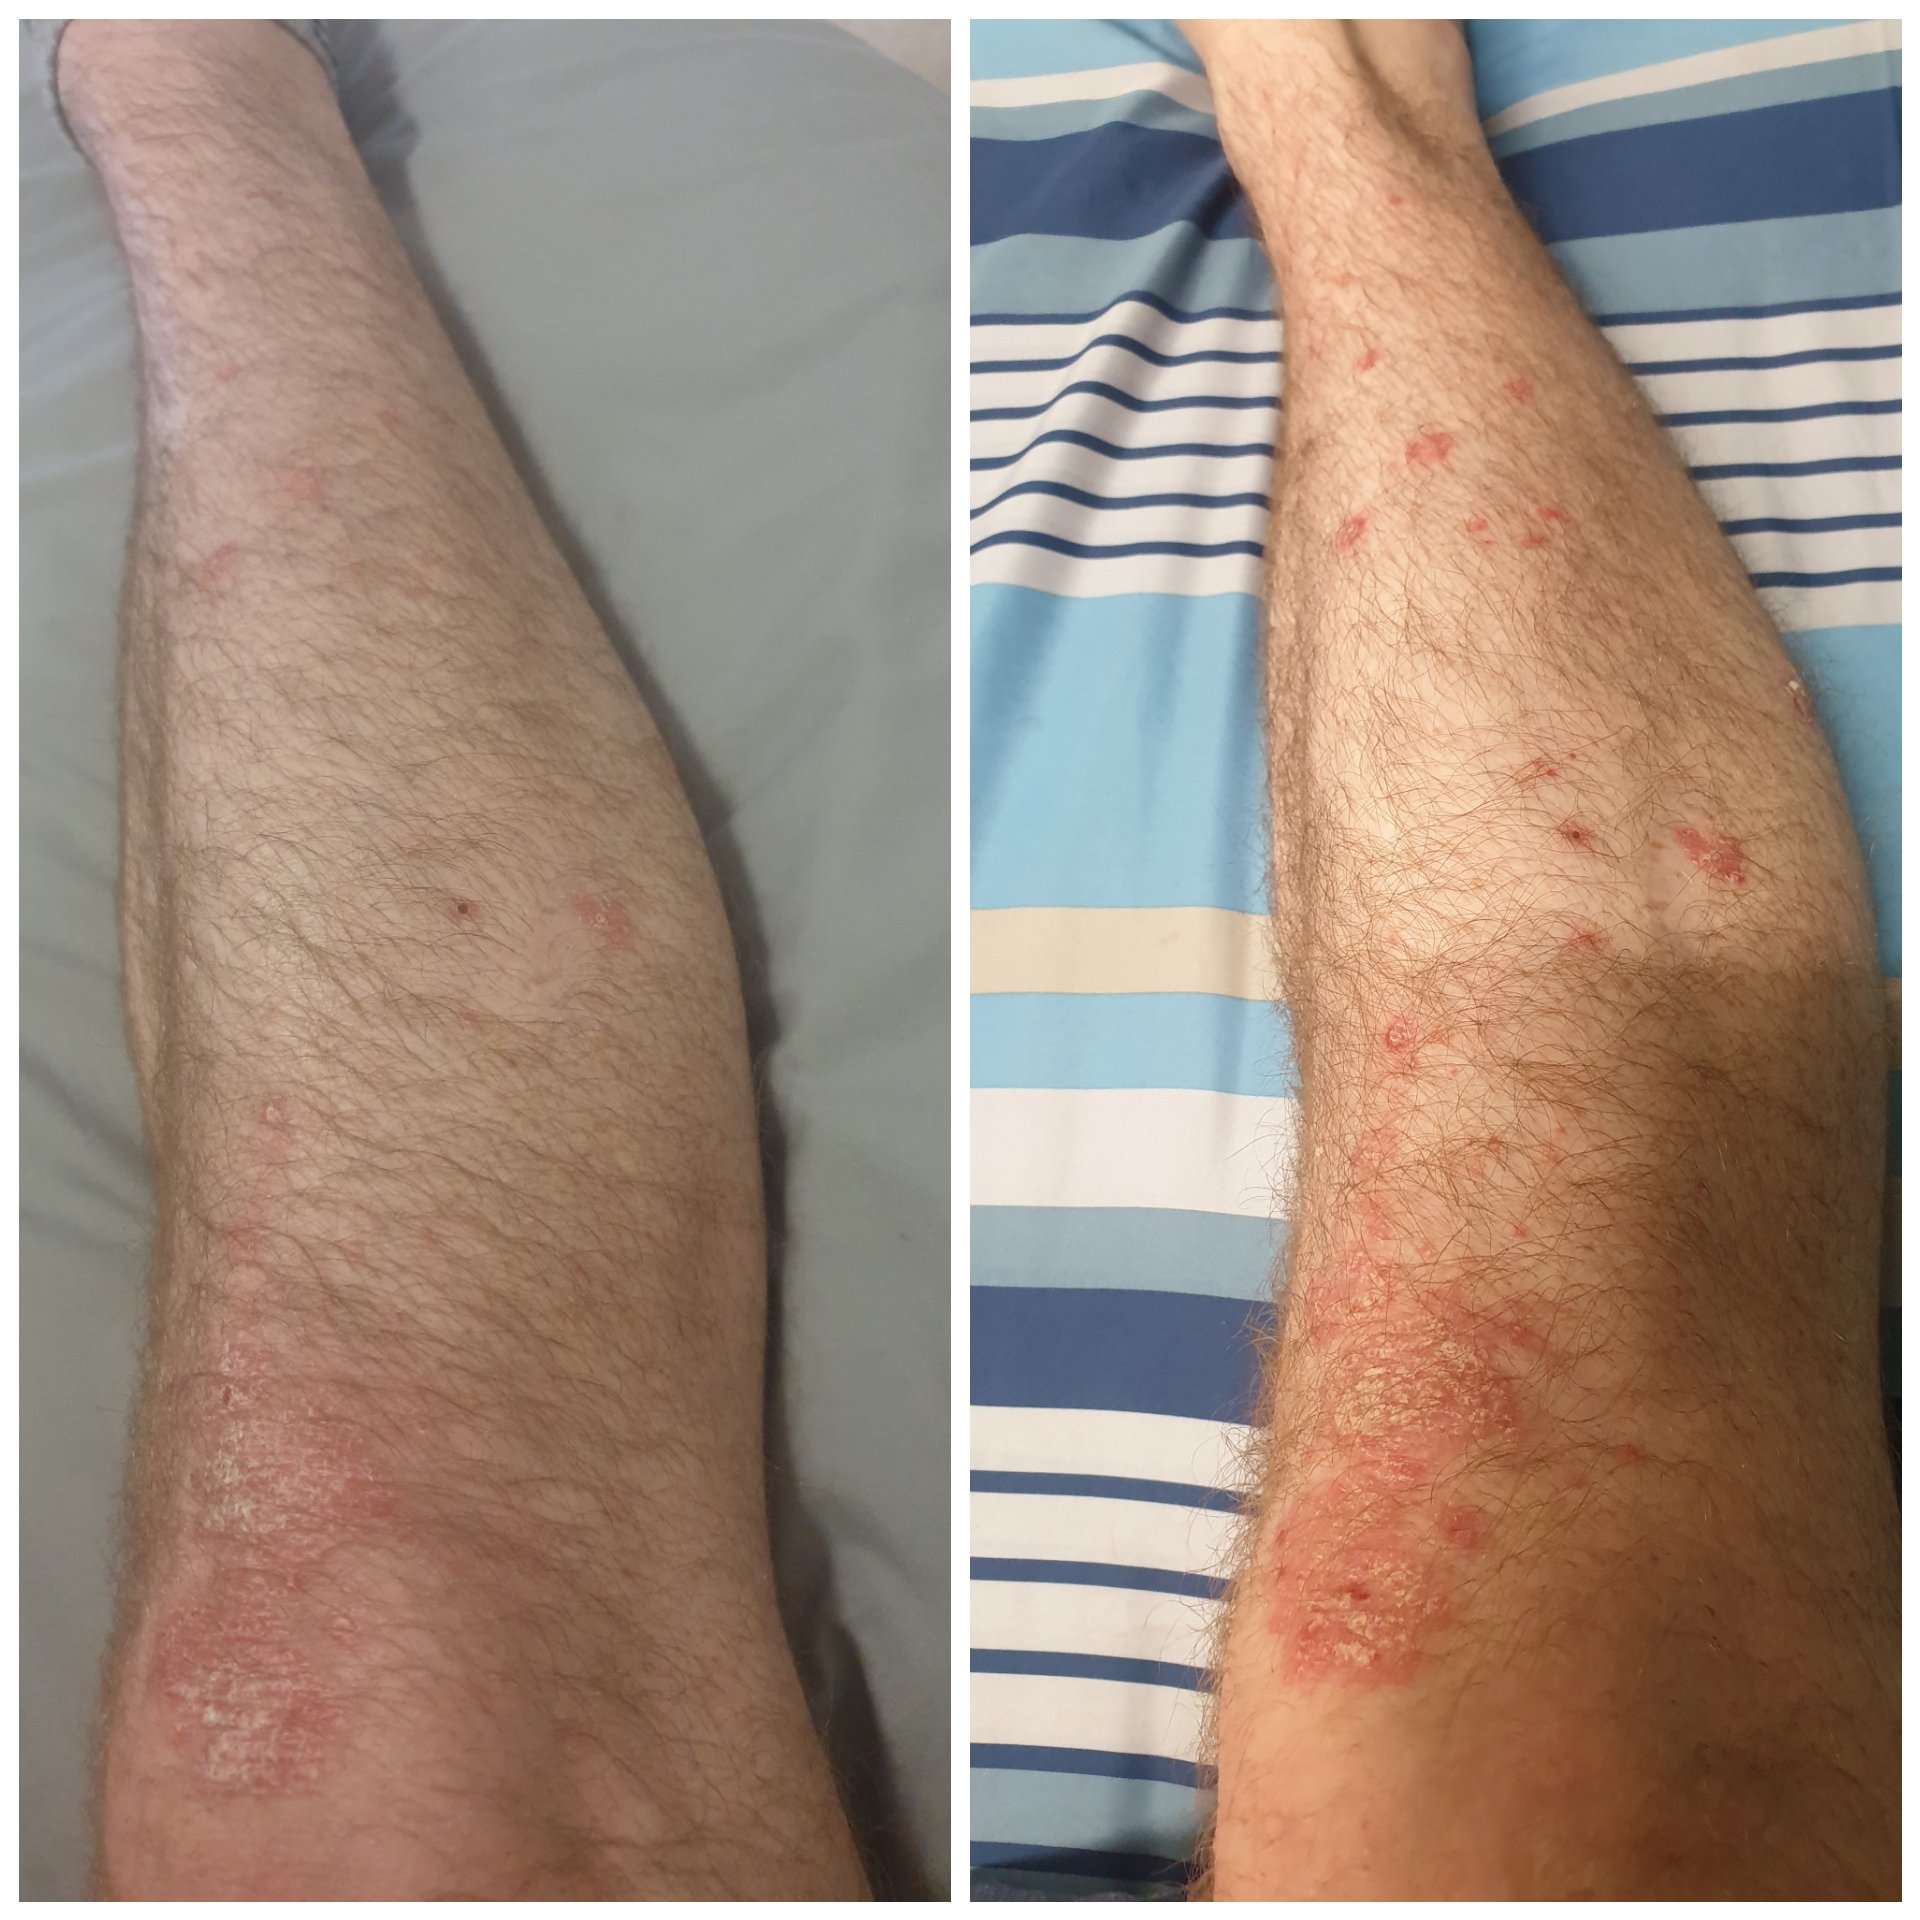 Before and after flight to work. : Psoriasis